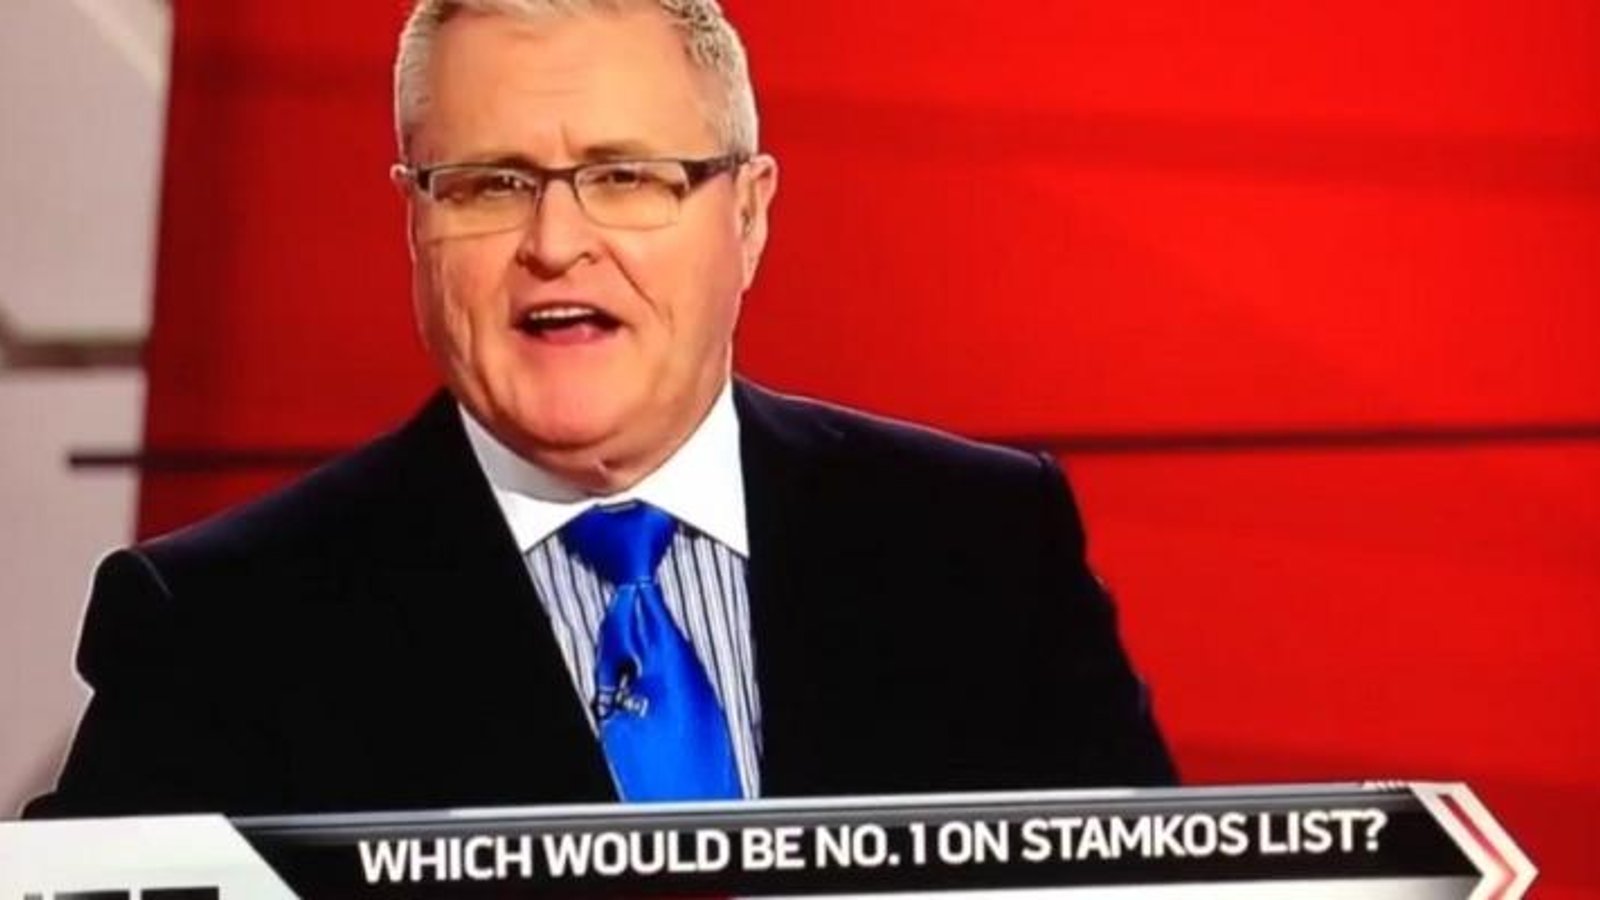 McKenzie asked what Stamkos #1 choice would be, gives a shocking answer.